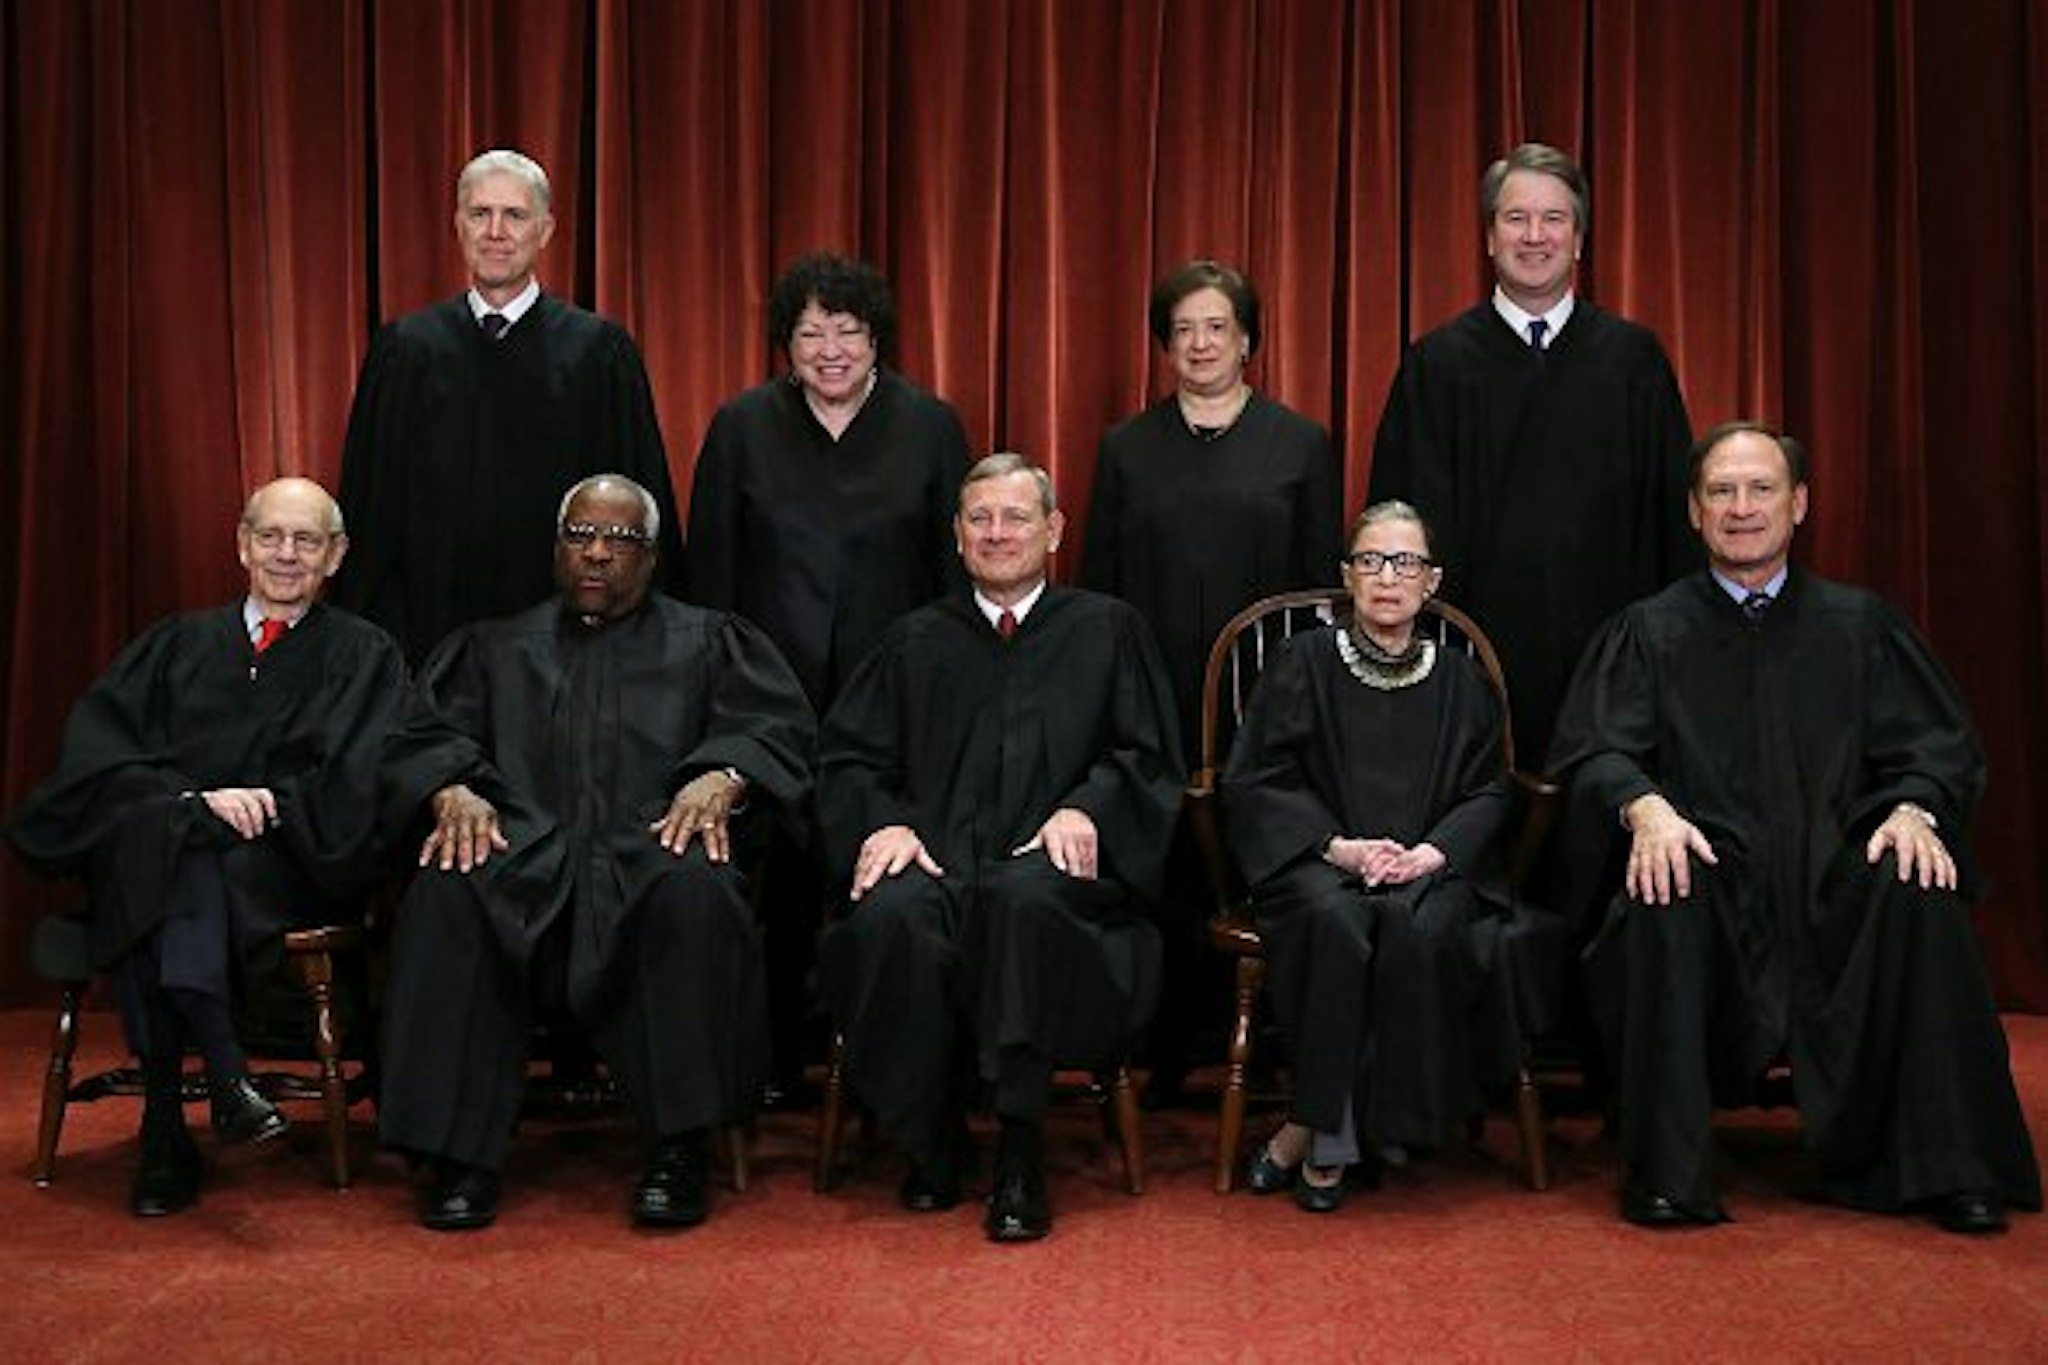 United States Supreme Court (Front L-R) Associate Justice Stephen Breyer, Associate Justice Clarence Thomas, Chief Justice John Roberts, Associate Justice Ruth Bader Ginsburg, Associate Justice Samuel Alito, Jr.,